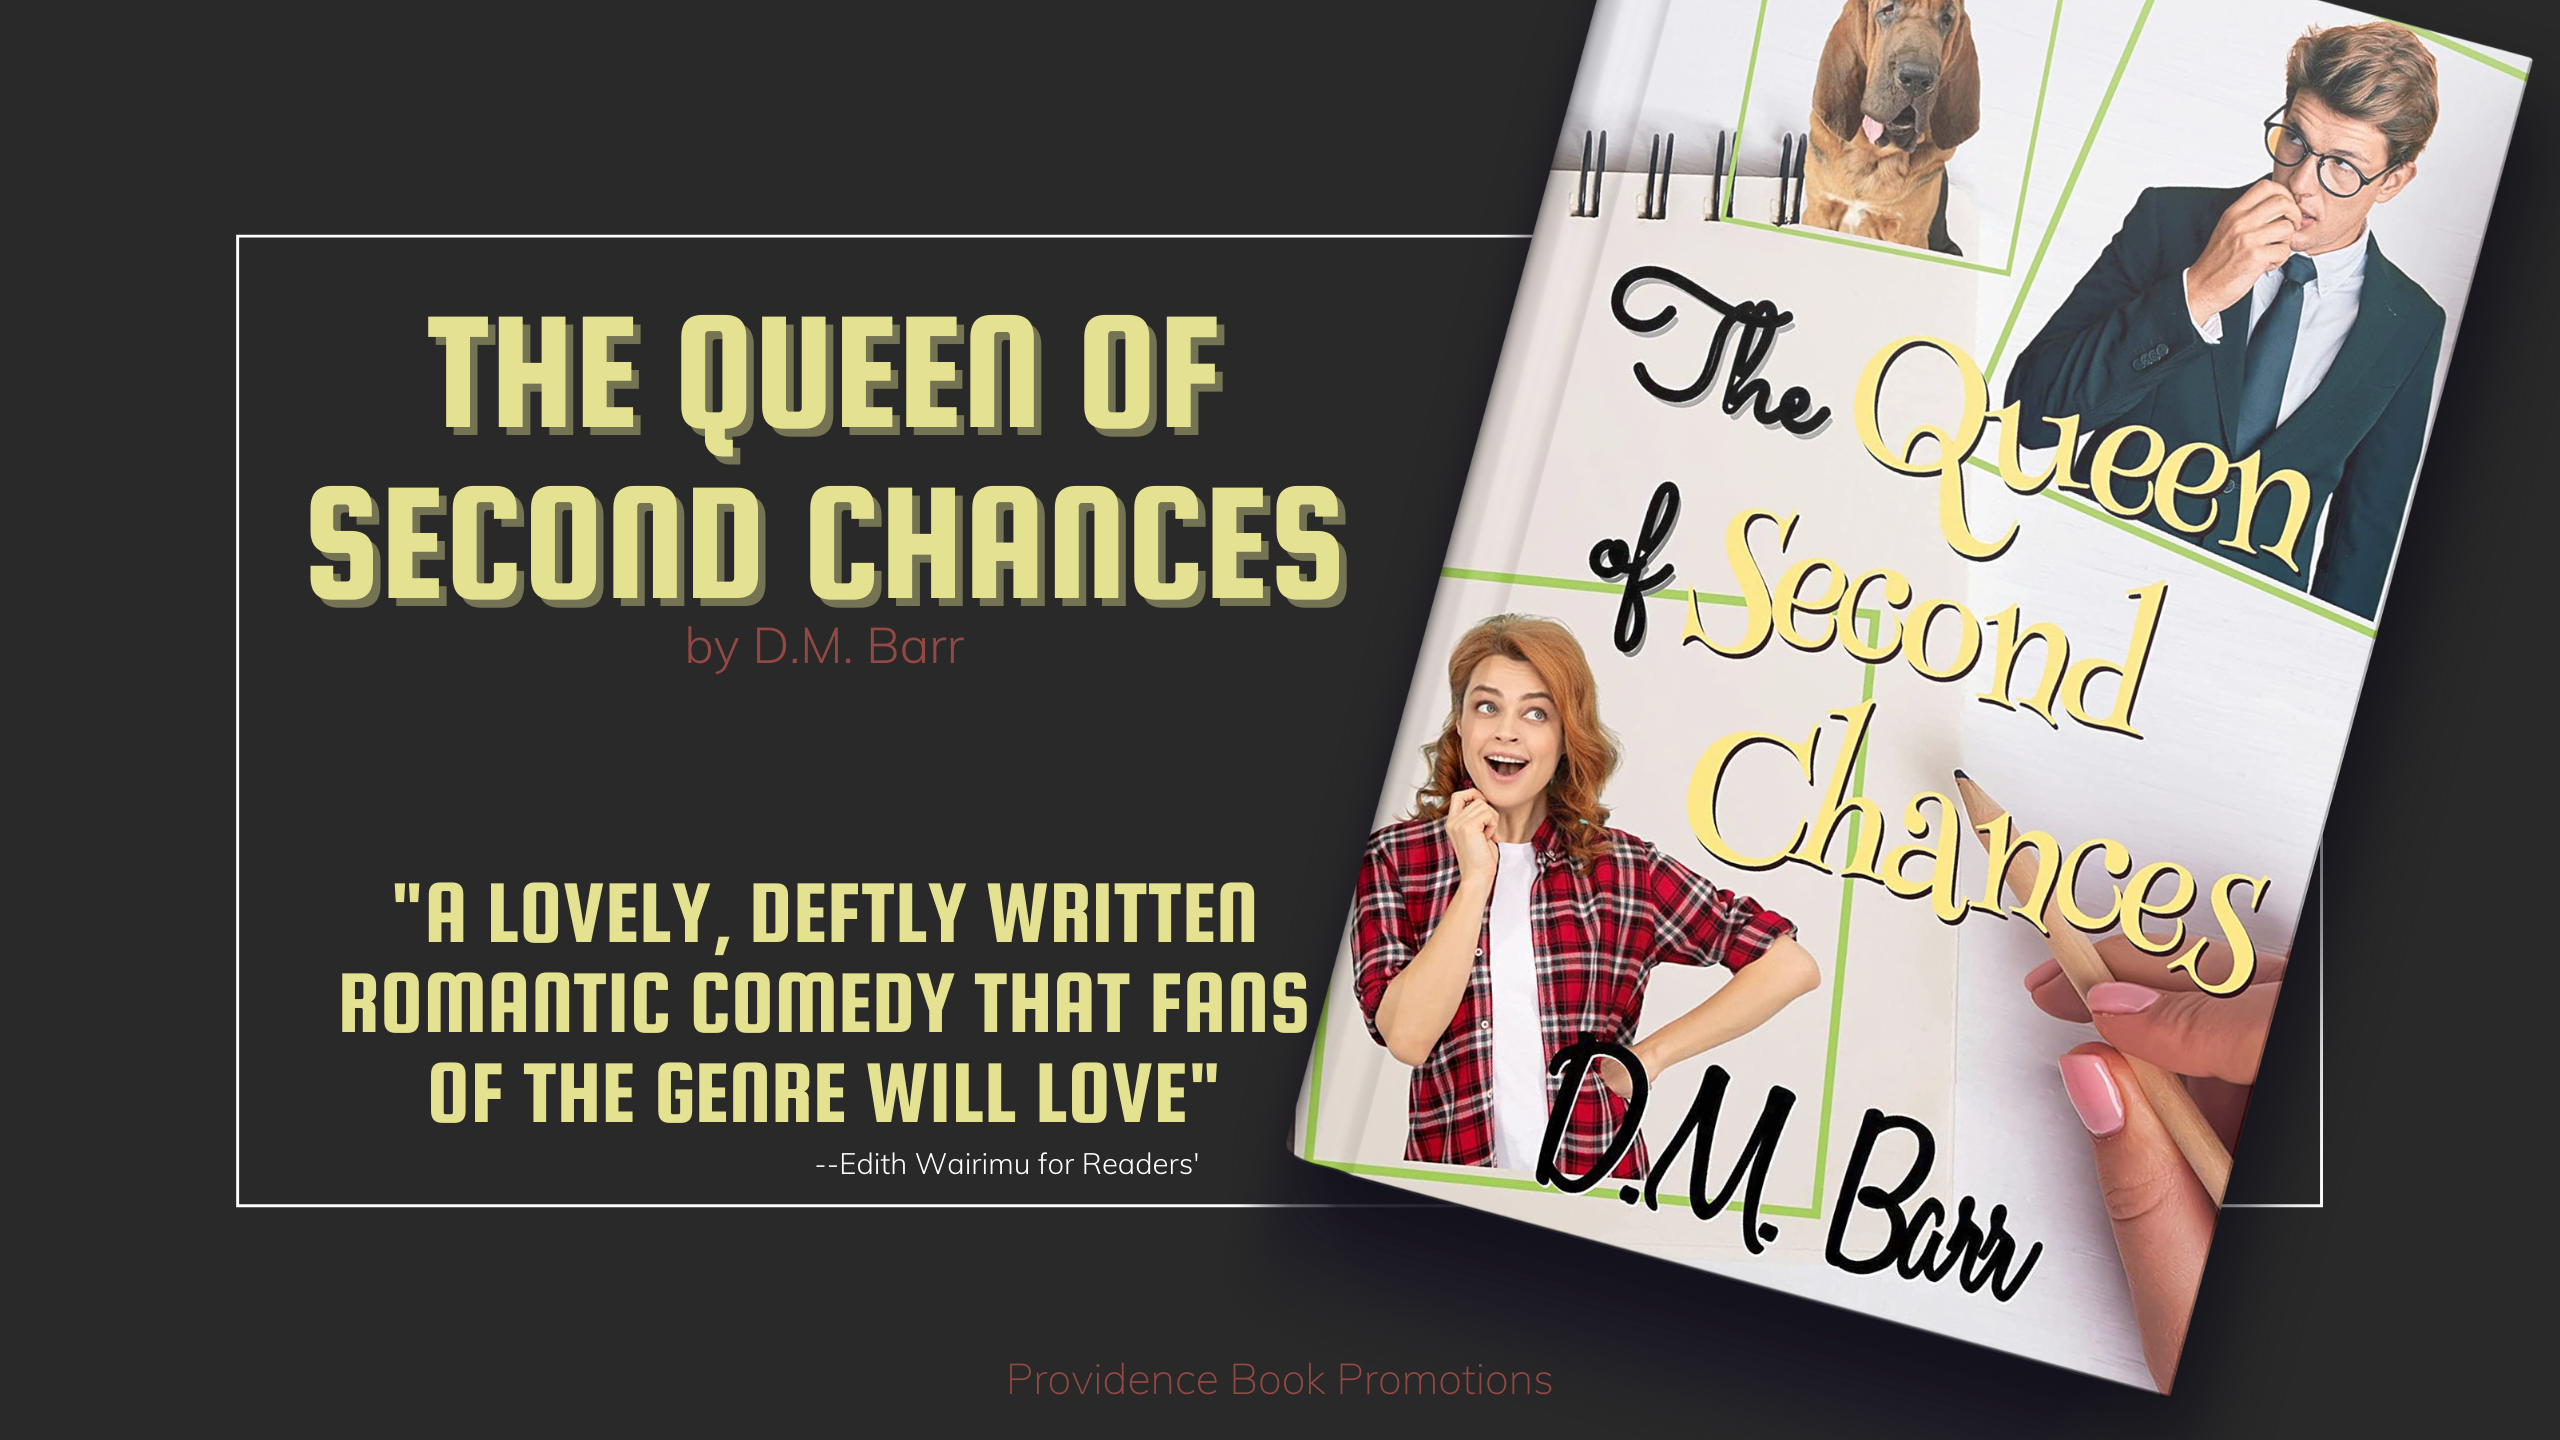 The Queen of Second Chances by D.M. Barr